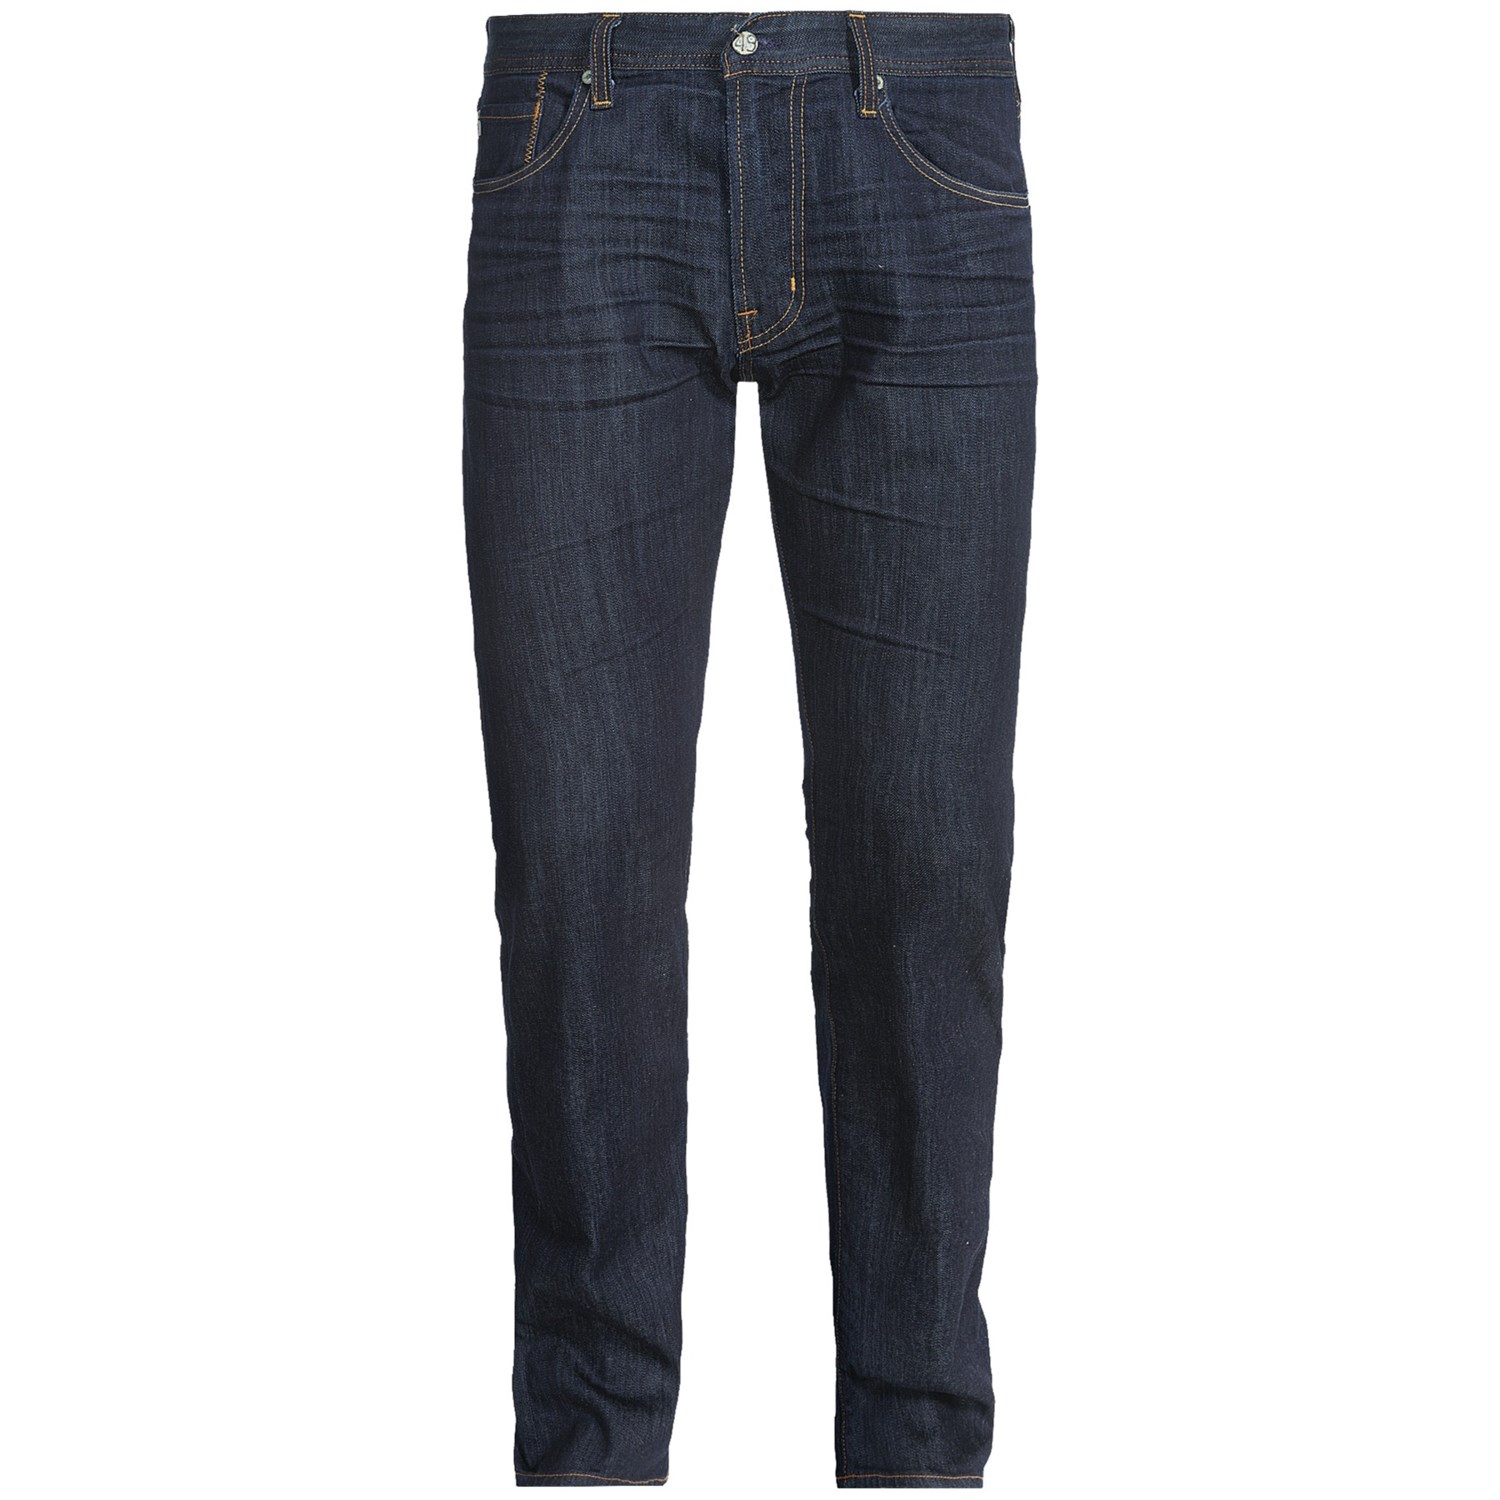 AG Jeans The Protege Jeans - Straight Leg (For Men) - Save 54%